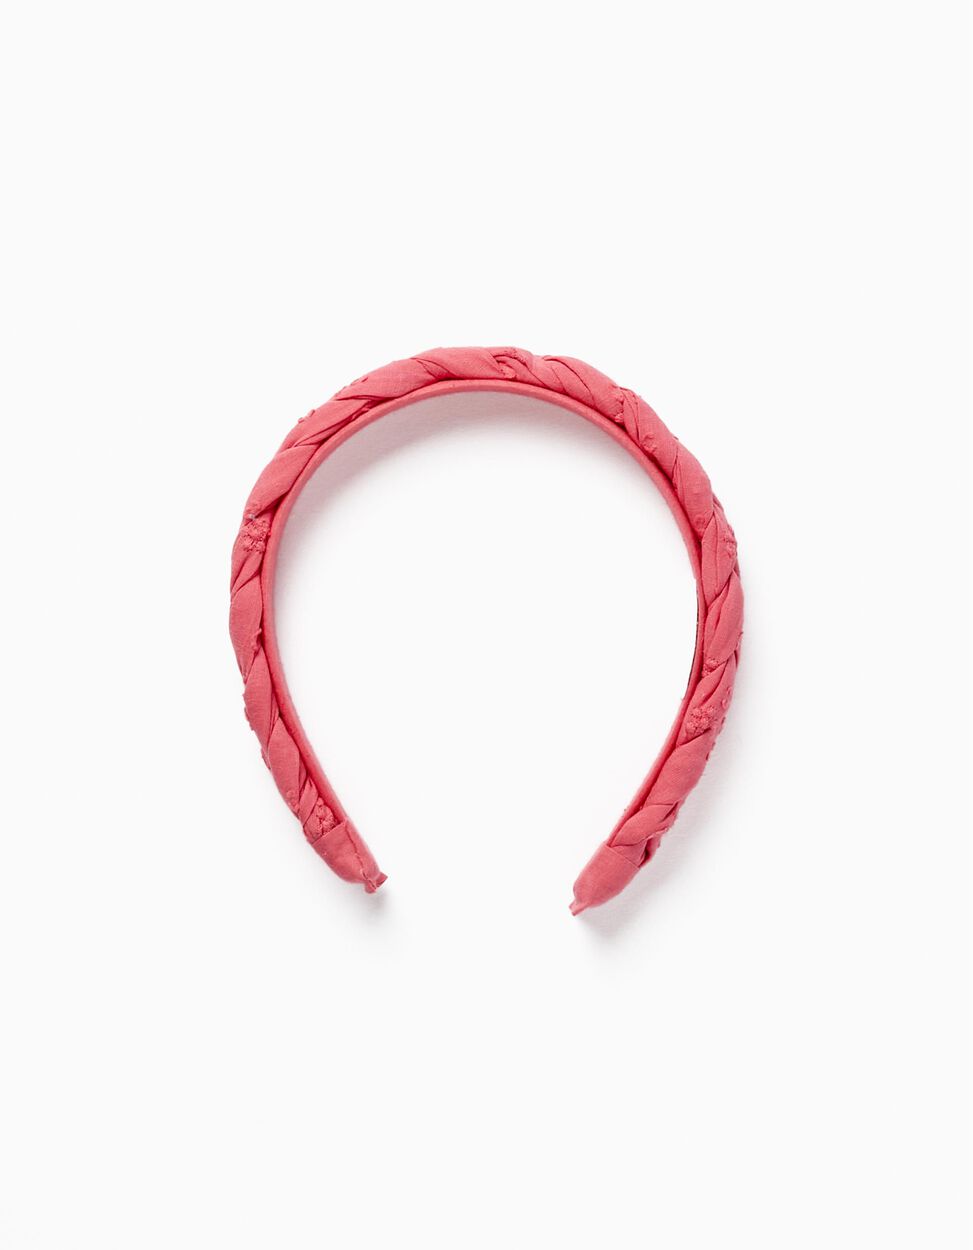 Buy Online Fabric Headband with Braided Detail for Girls, Pink